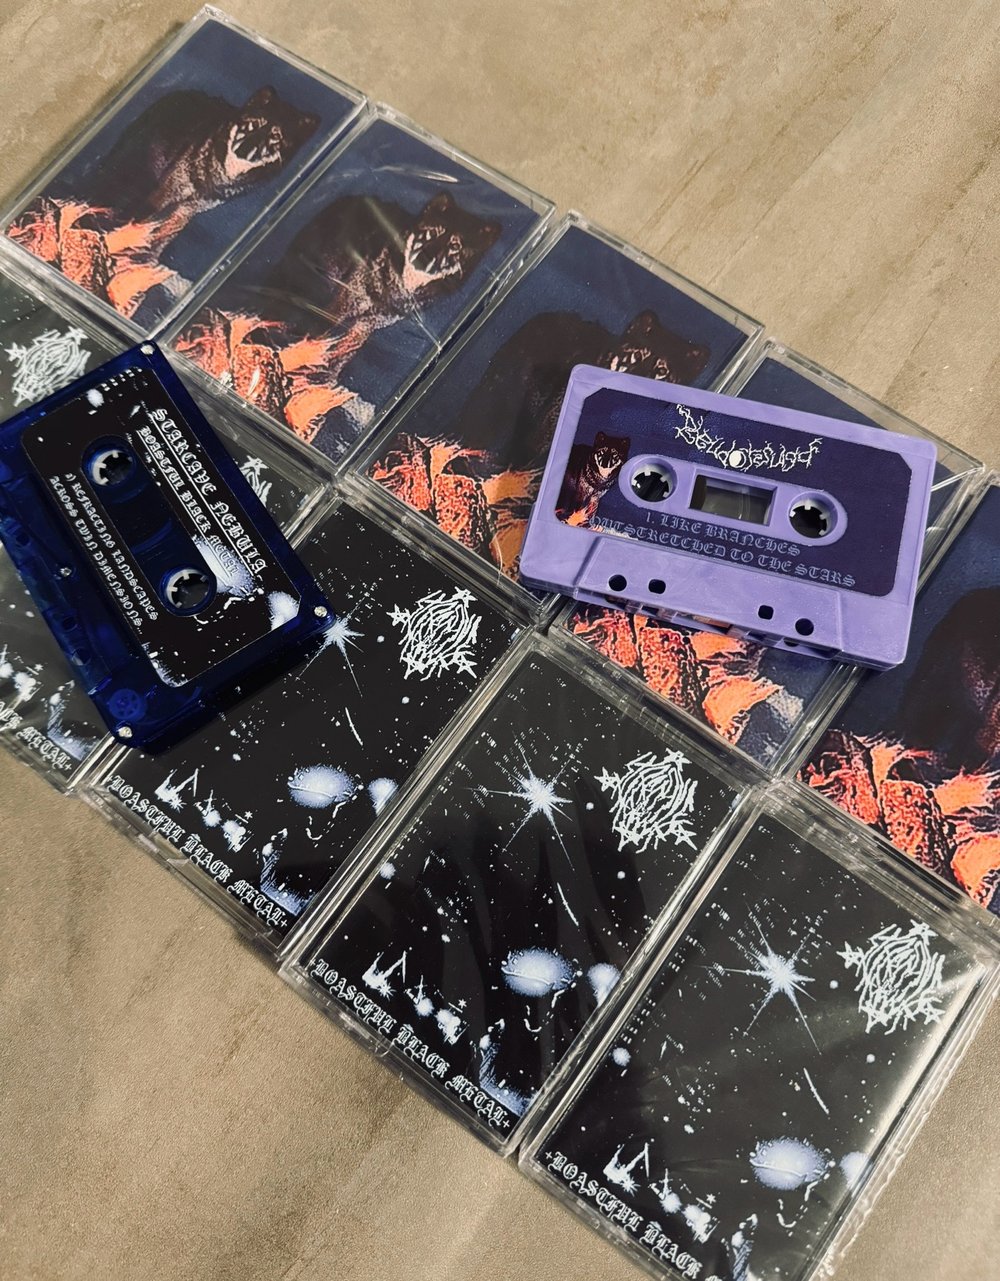 Keepers of the Flame Distro